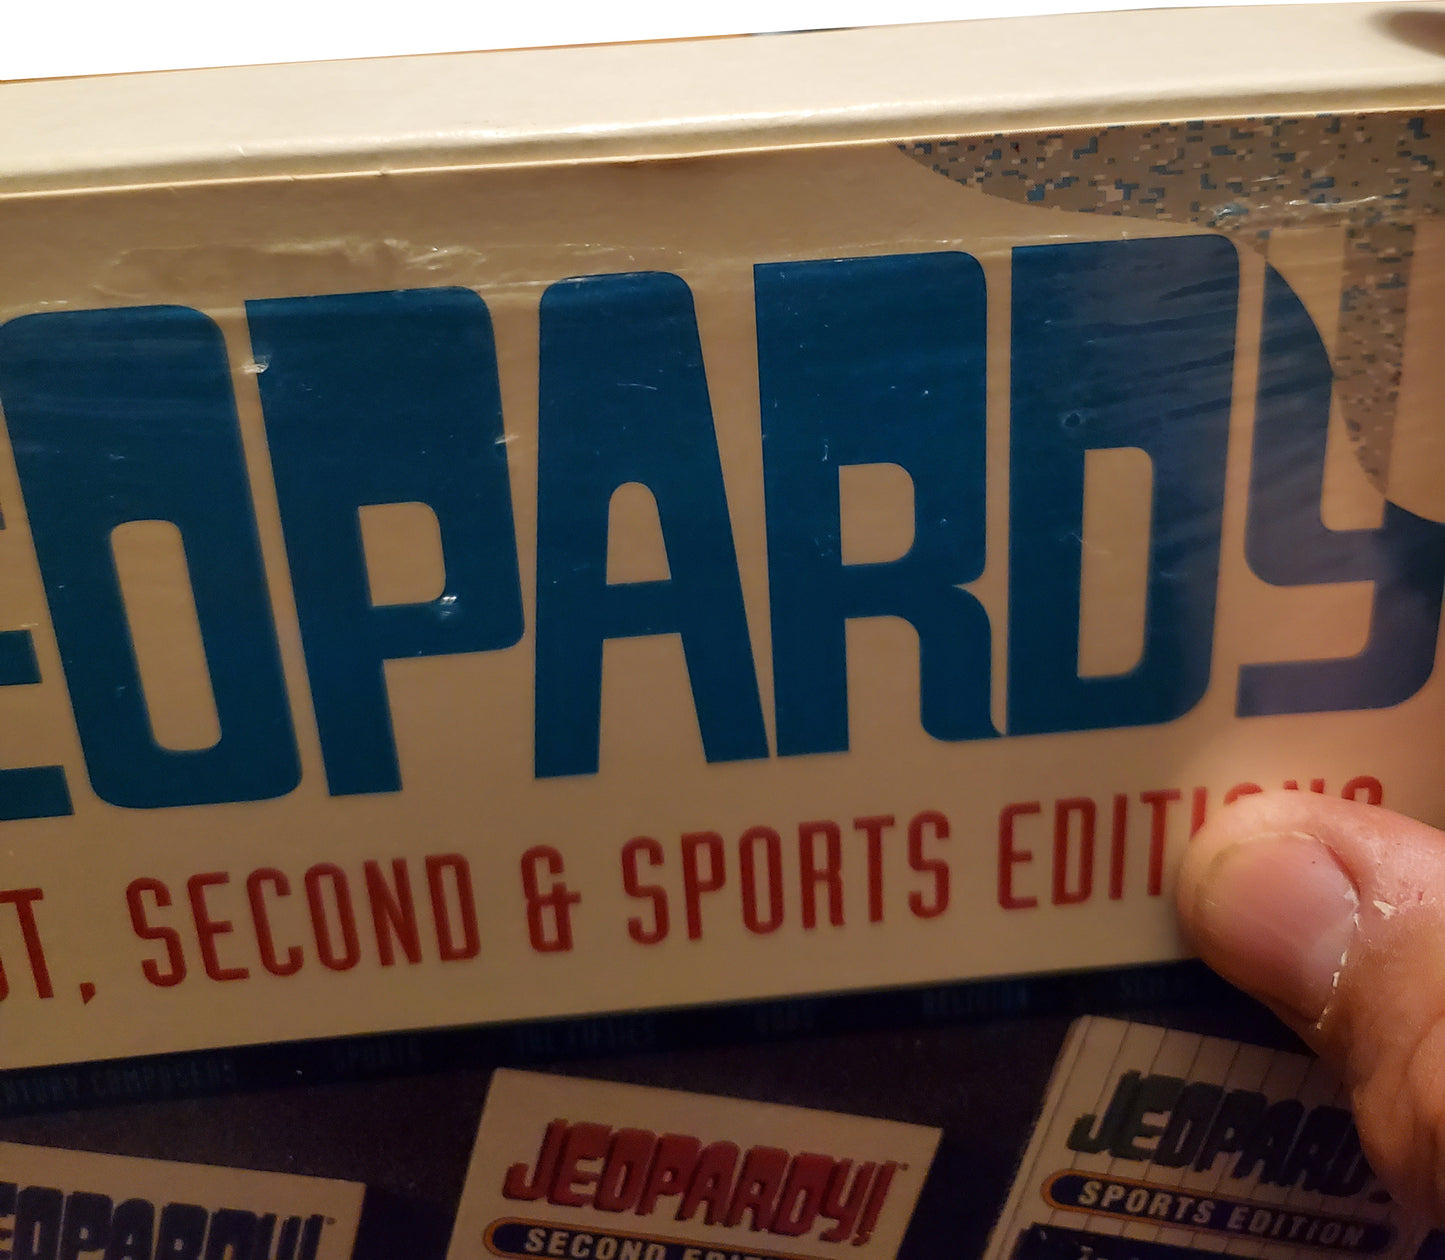 Jeopardy! First, Second & Sports Editions